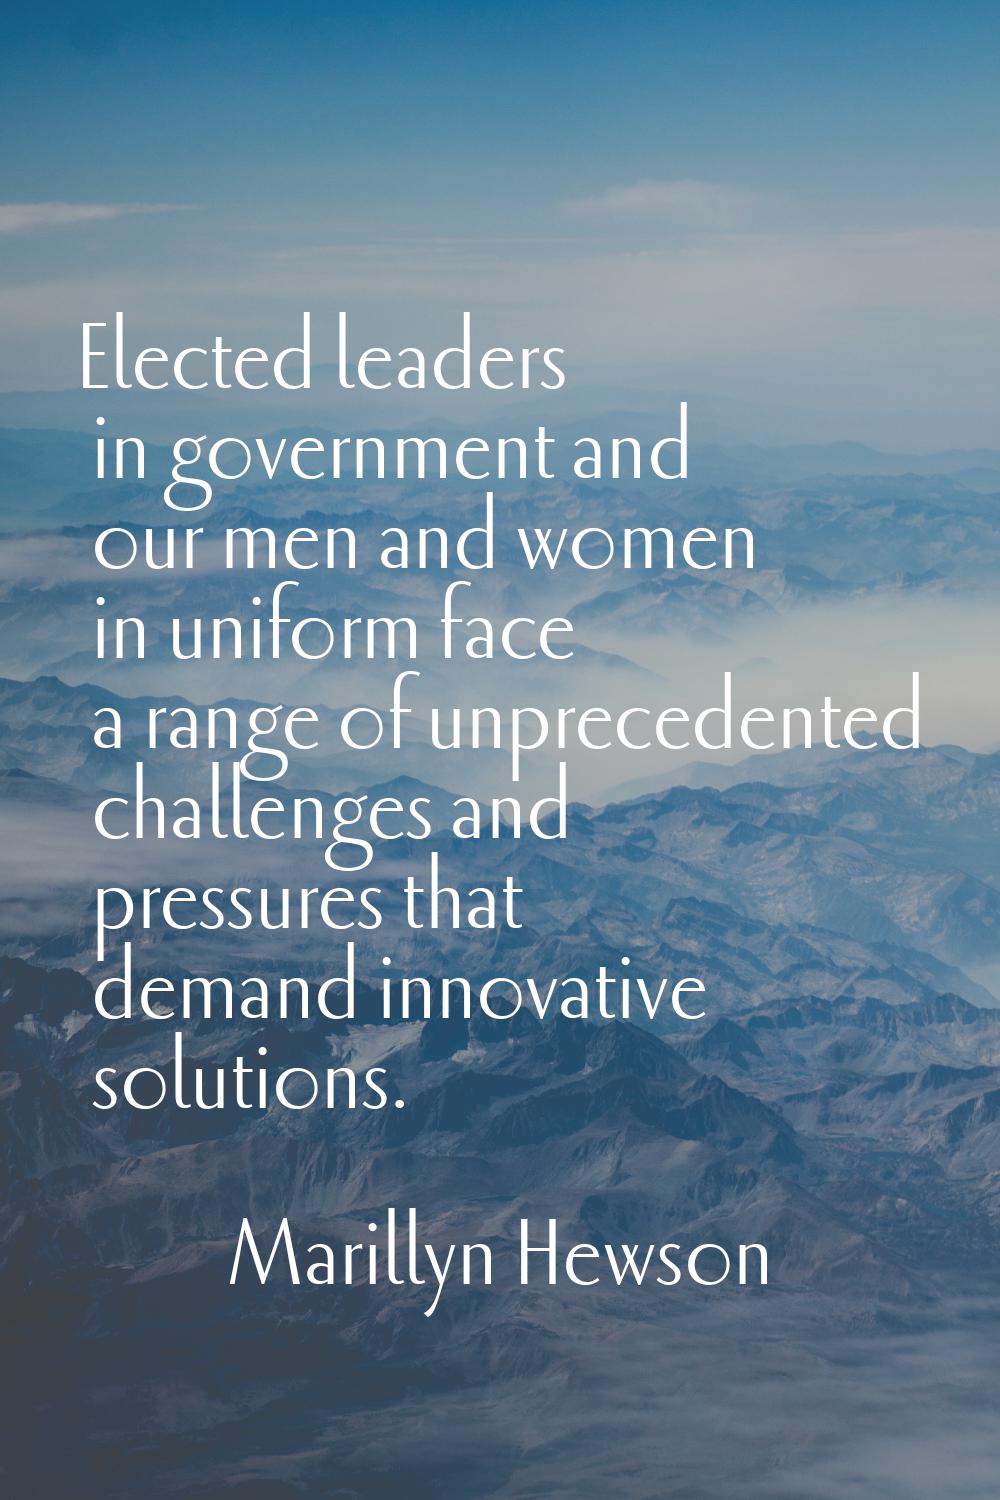 Elected leaders in government and our men and women in uniform face a range of unprecedented challe